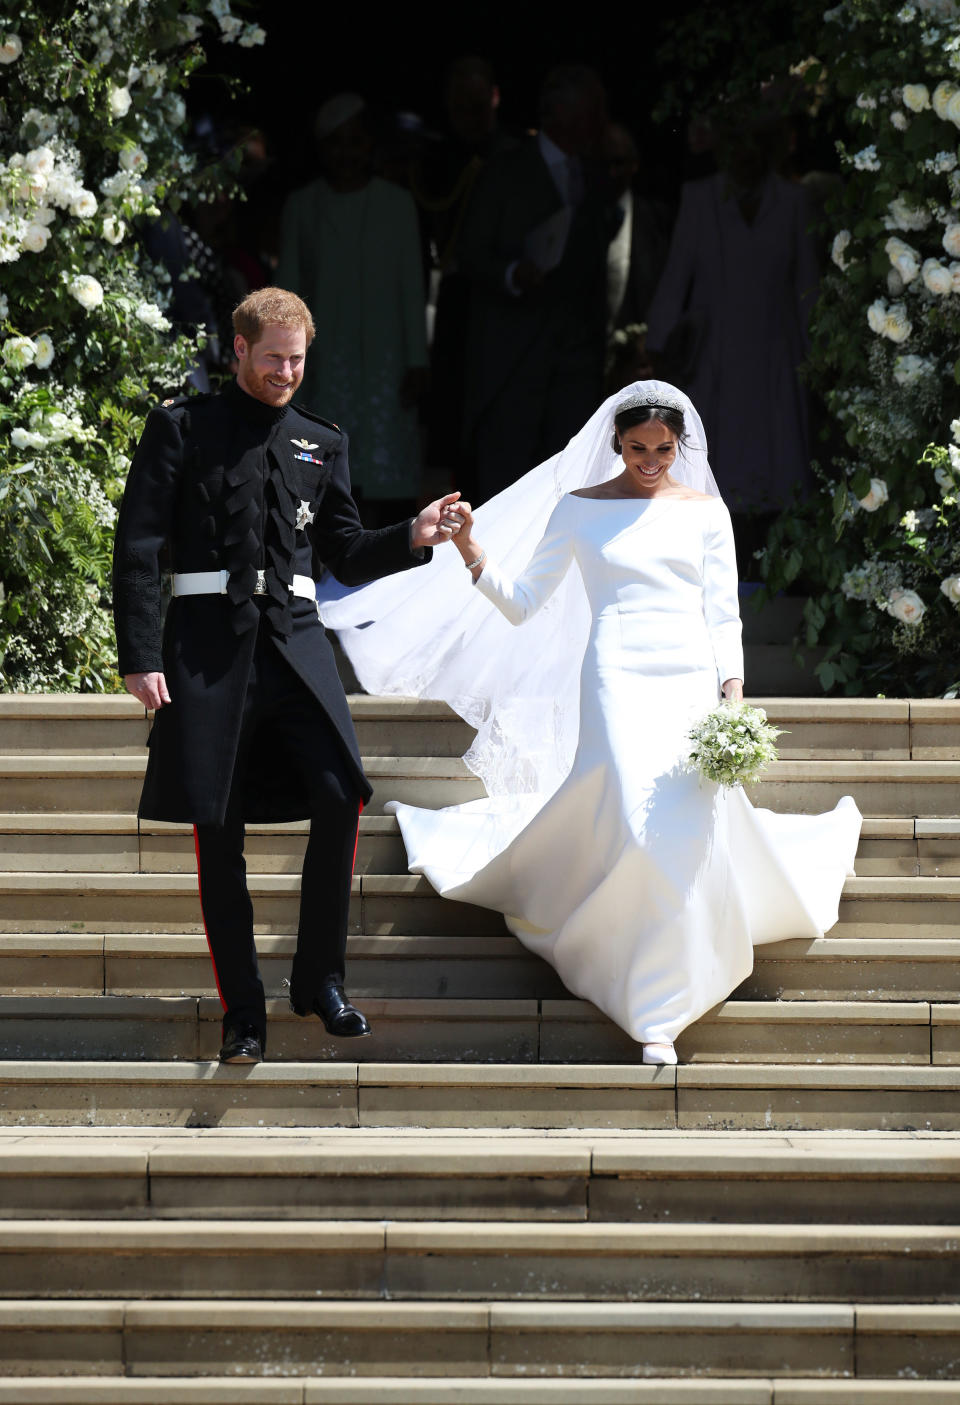 The 92-year-old Monarch is said to be a ‘stickler for the rules’ and also was quite surprised when Meghan wore a crisp white, long-sleeved Givenchy gown on her wedding day – due to the fact that the Duchess has been married once before. Photo: Getty Images